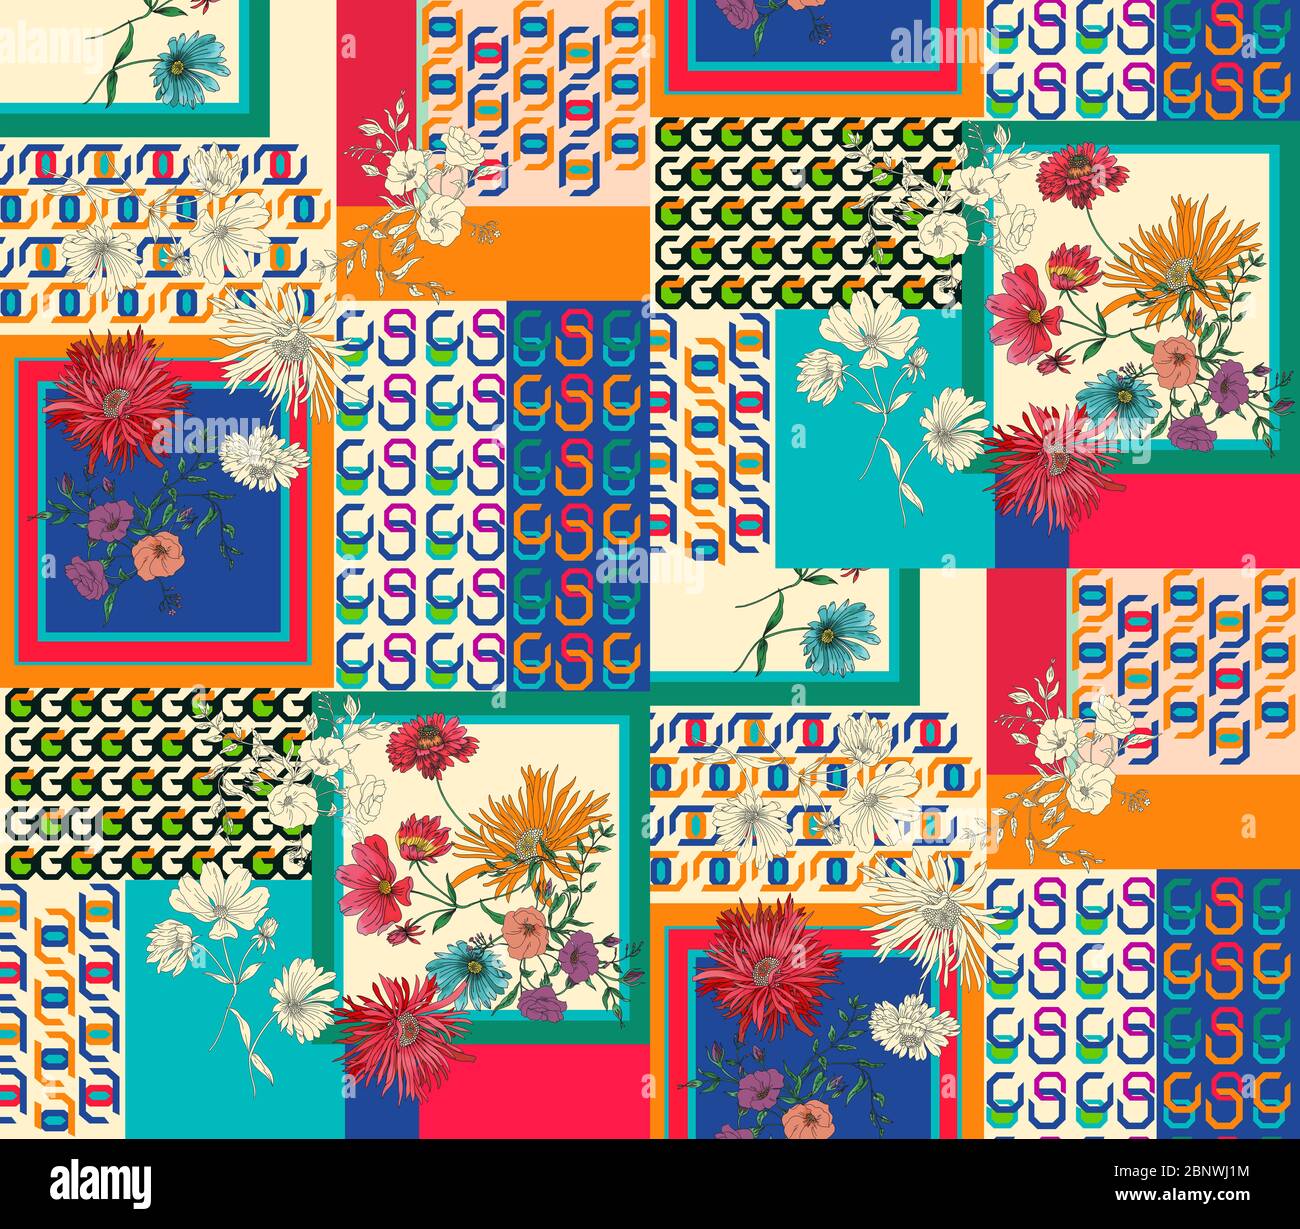 Seamless modern patchwork pattern with flowers and lines. Ethnic indian style. Ready for textile prints. Stock Photo